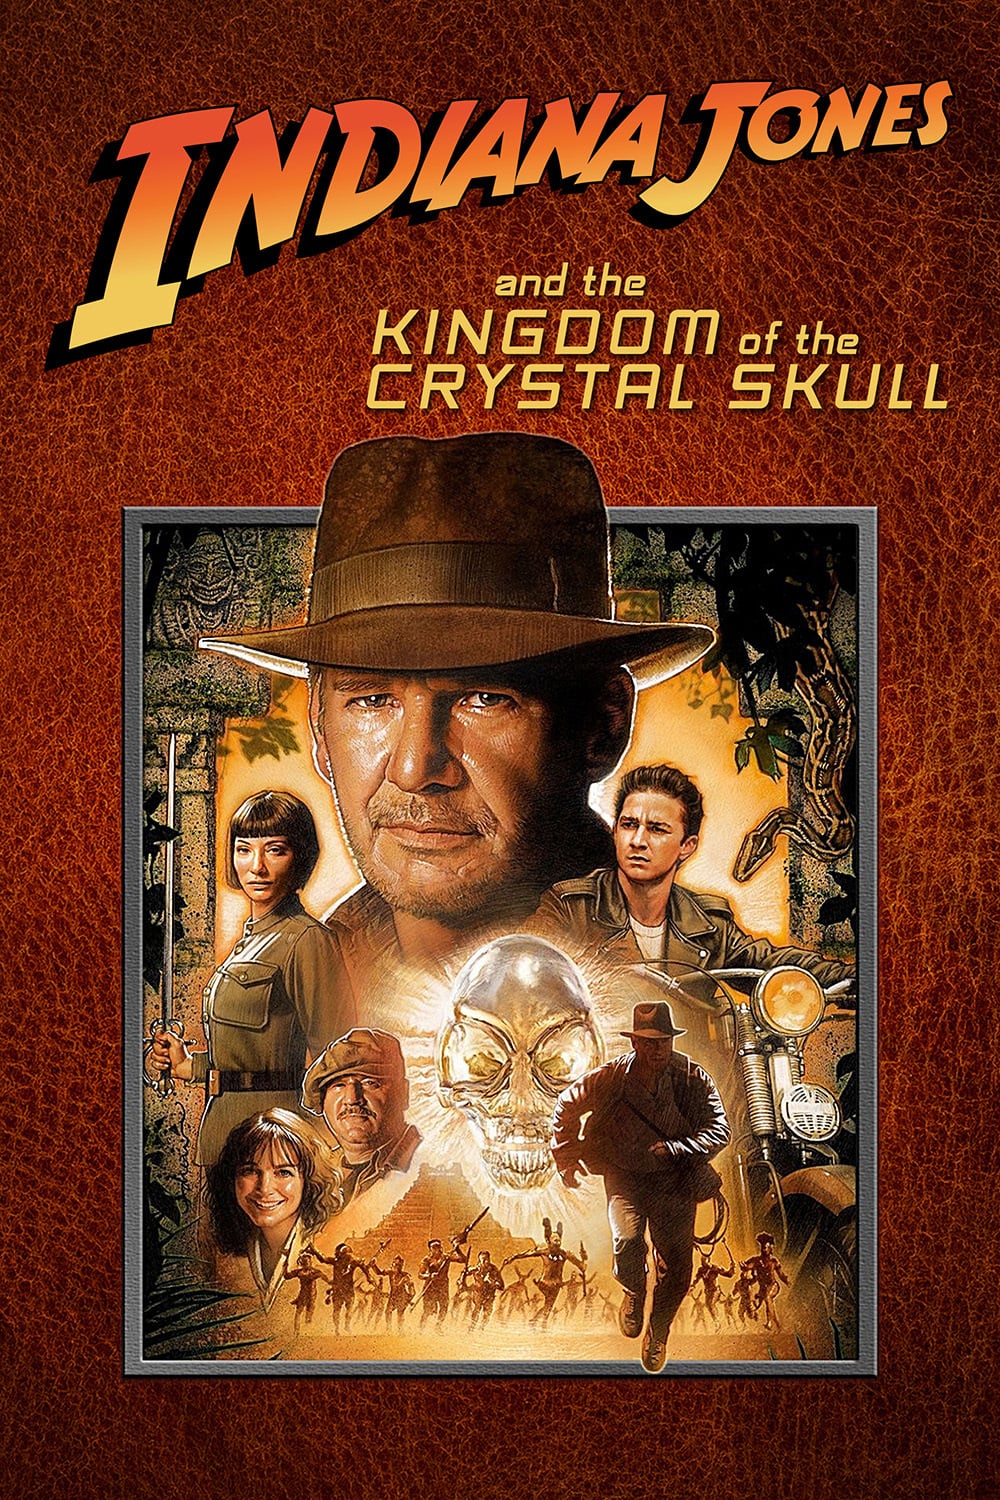 indiana-jones-and-the-kingdom-of-the-crystal-skull-two-disc-special-edition-blu-ray